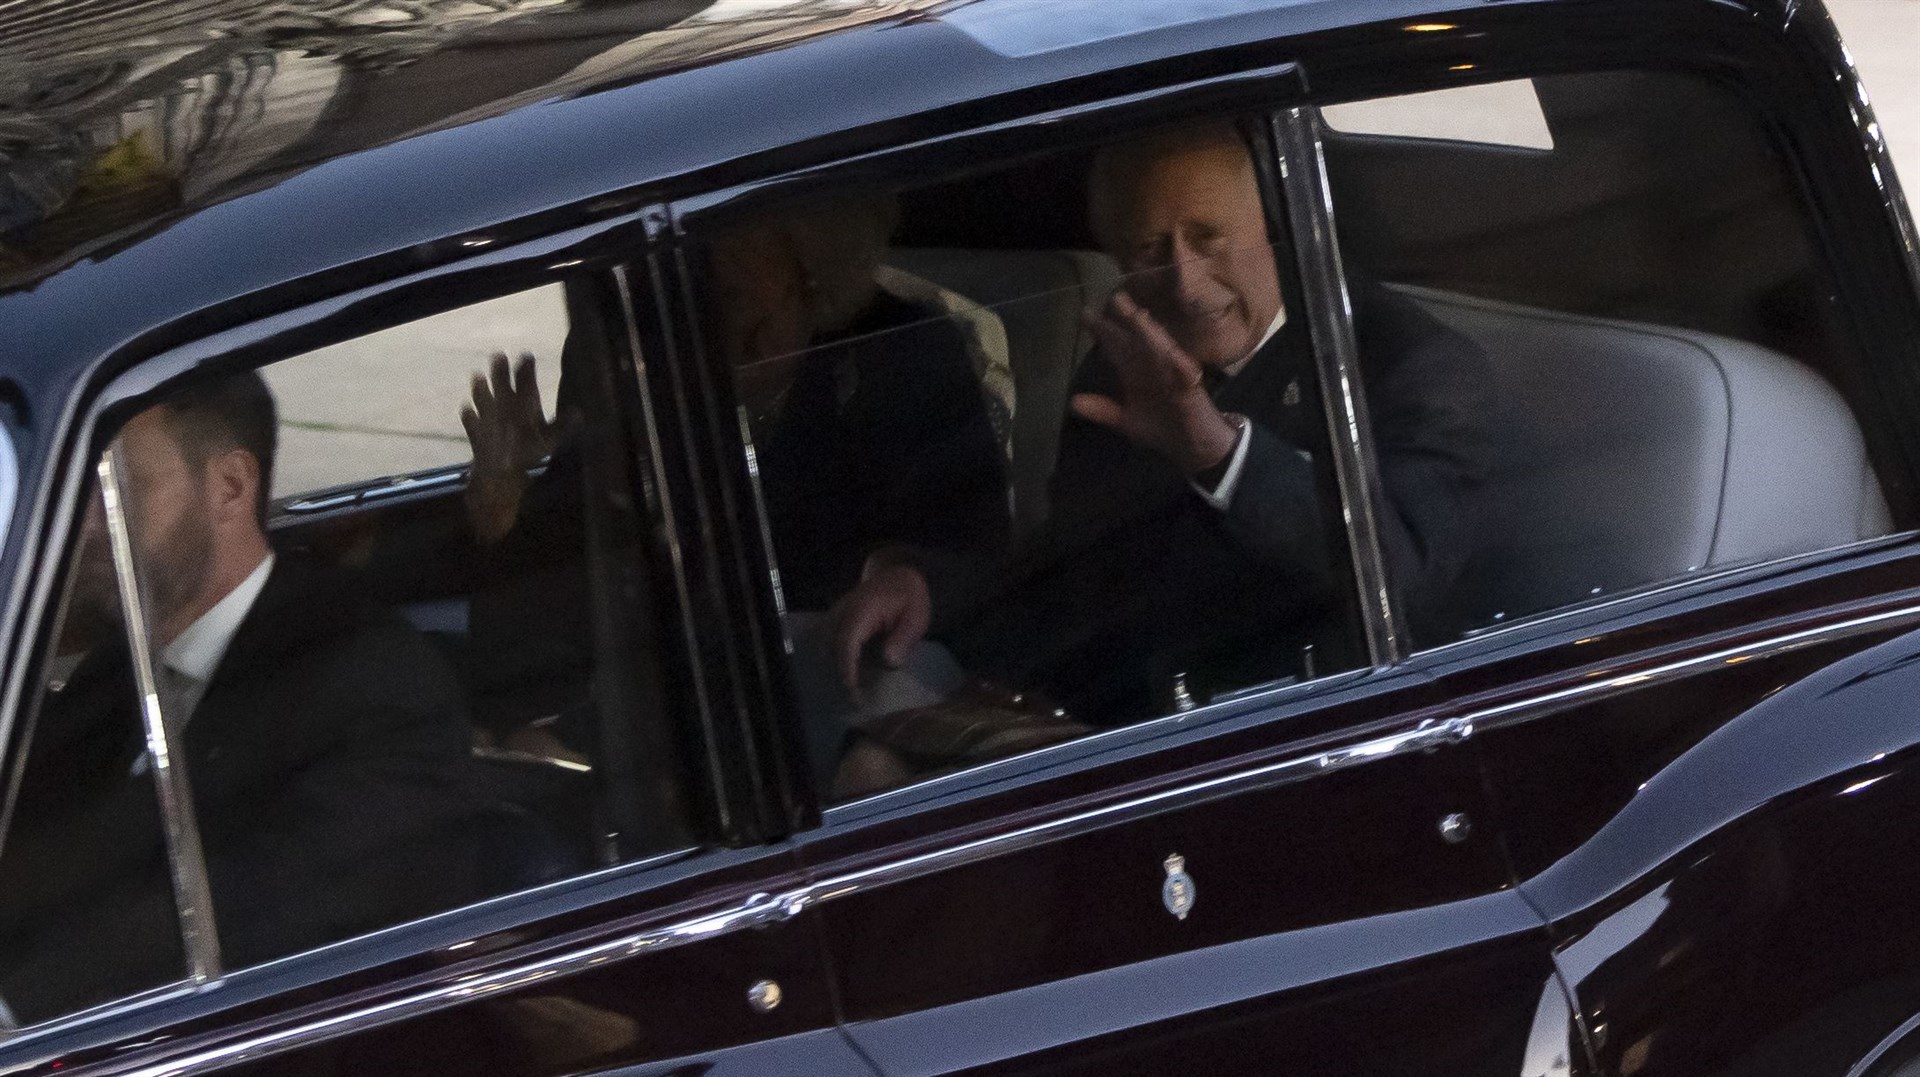 The King and the Queen Consort being driven away from St Giles Cathedral in Edinburgh on Monday (Lesley Martin/PA)